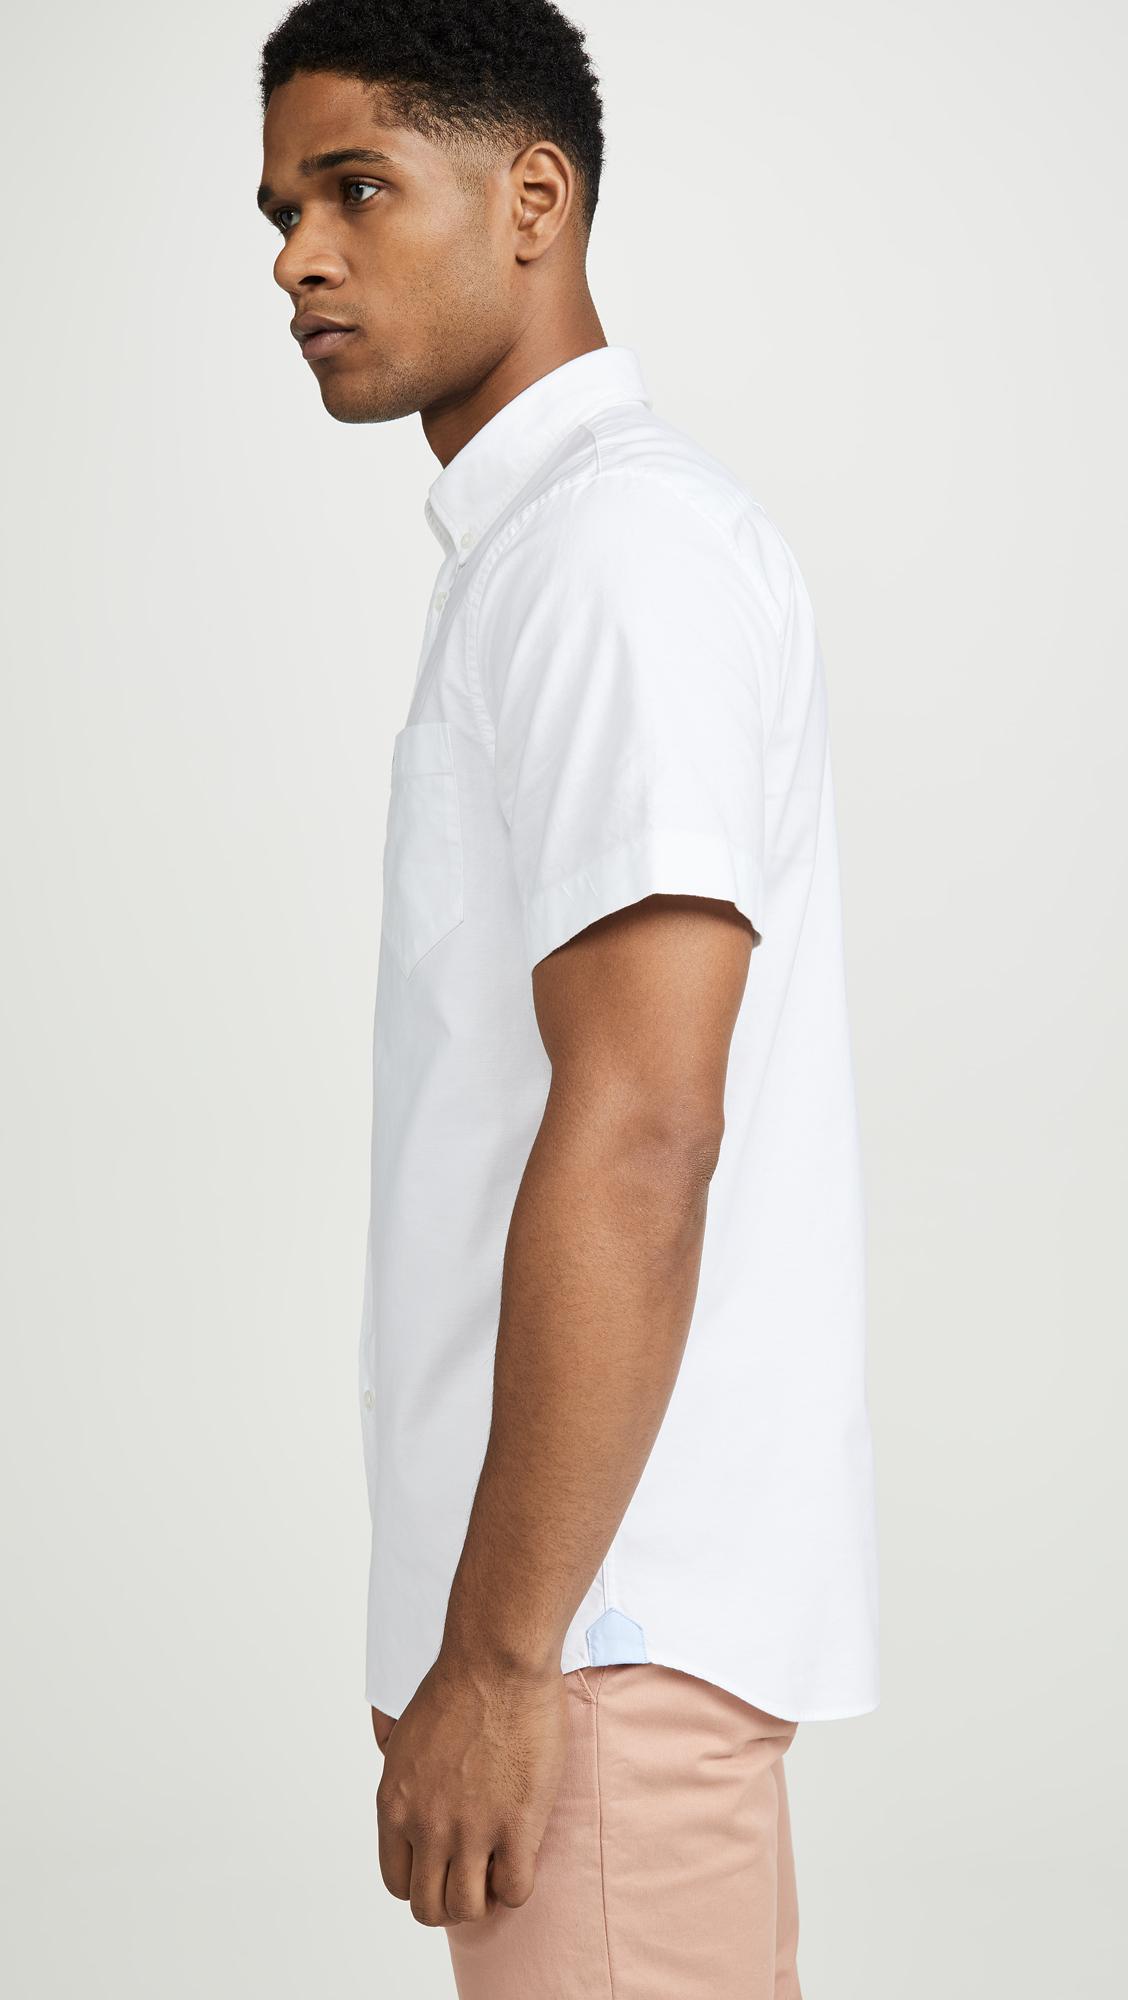 Lacoste Short Sleeve Button Down Oxford Shirt in White for Men - Lyst